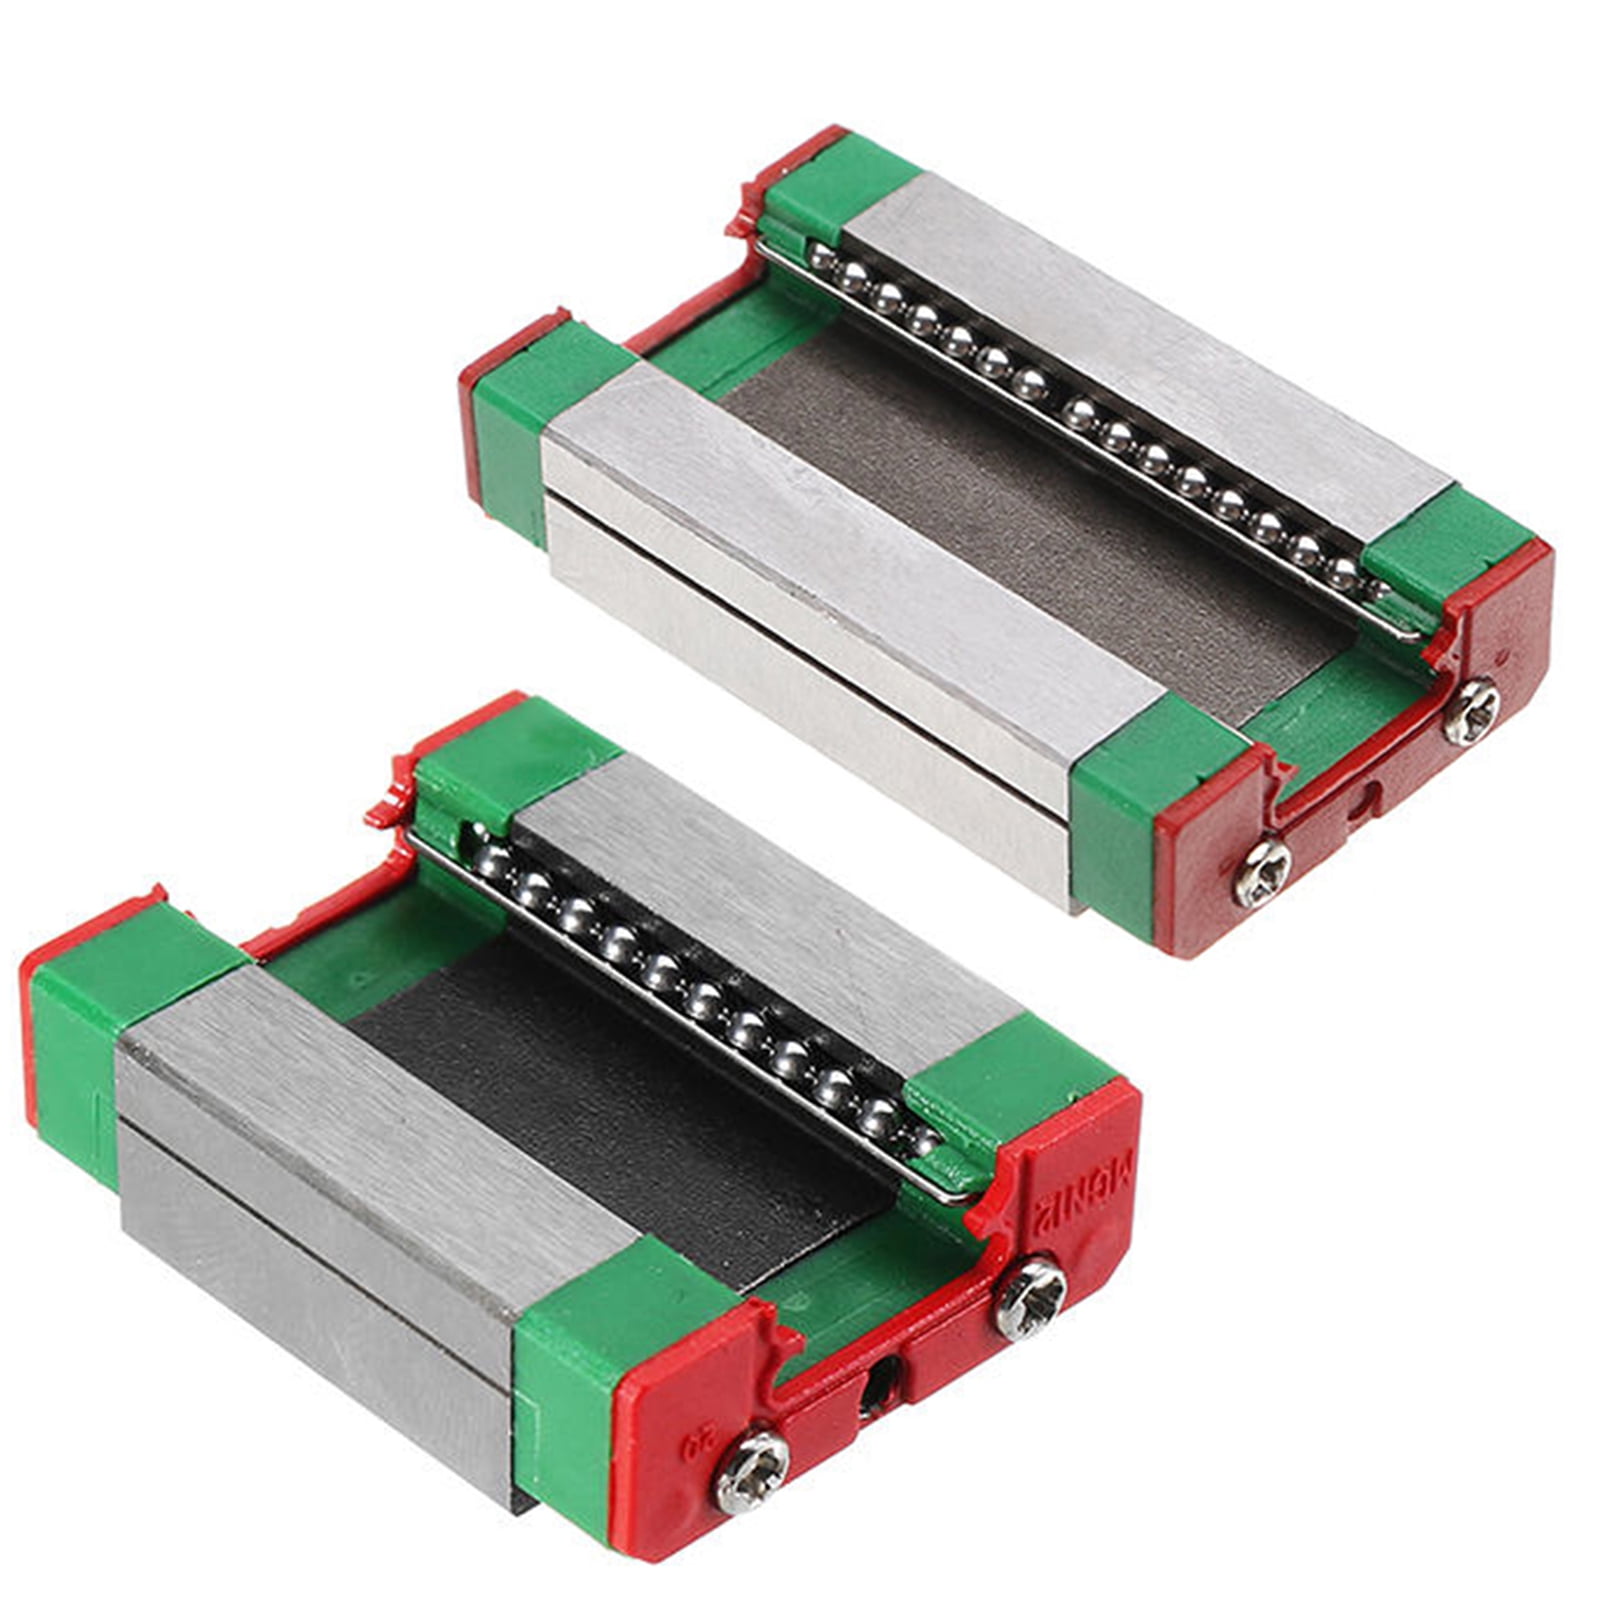 MGN12H 600×12mm Linear Guide Rail Locking Type Slide Rail Carriage CNC Router with 1Pc Sliding Block Linear Motion Rail Kit